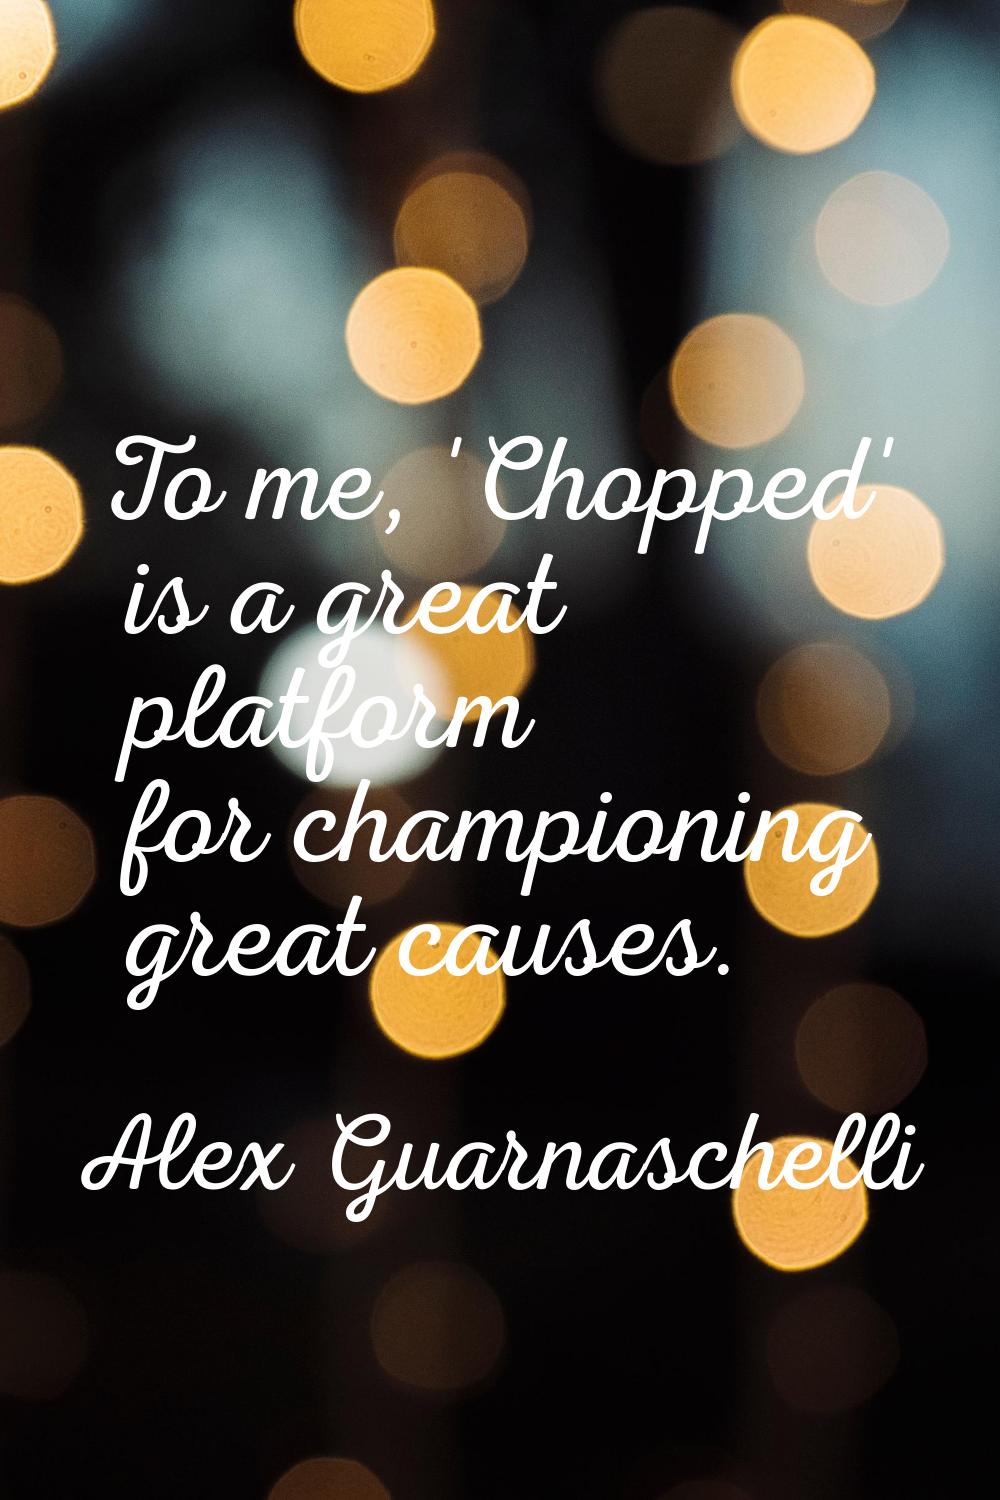 To me, 'Chopped' is a great platform for championing great causes.